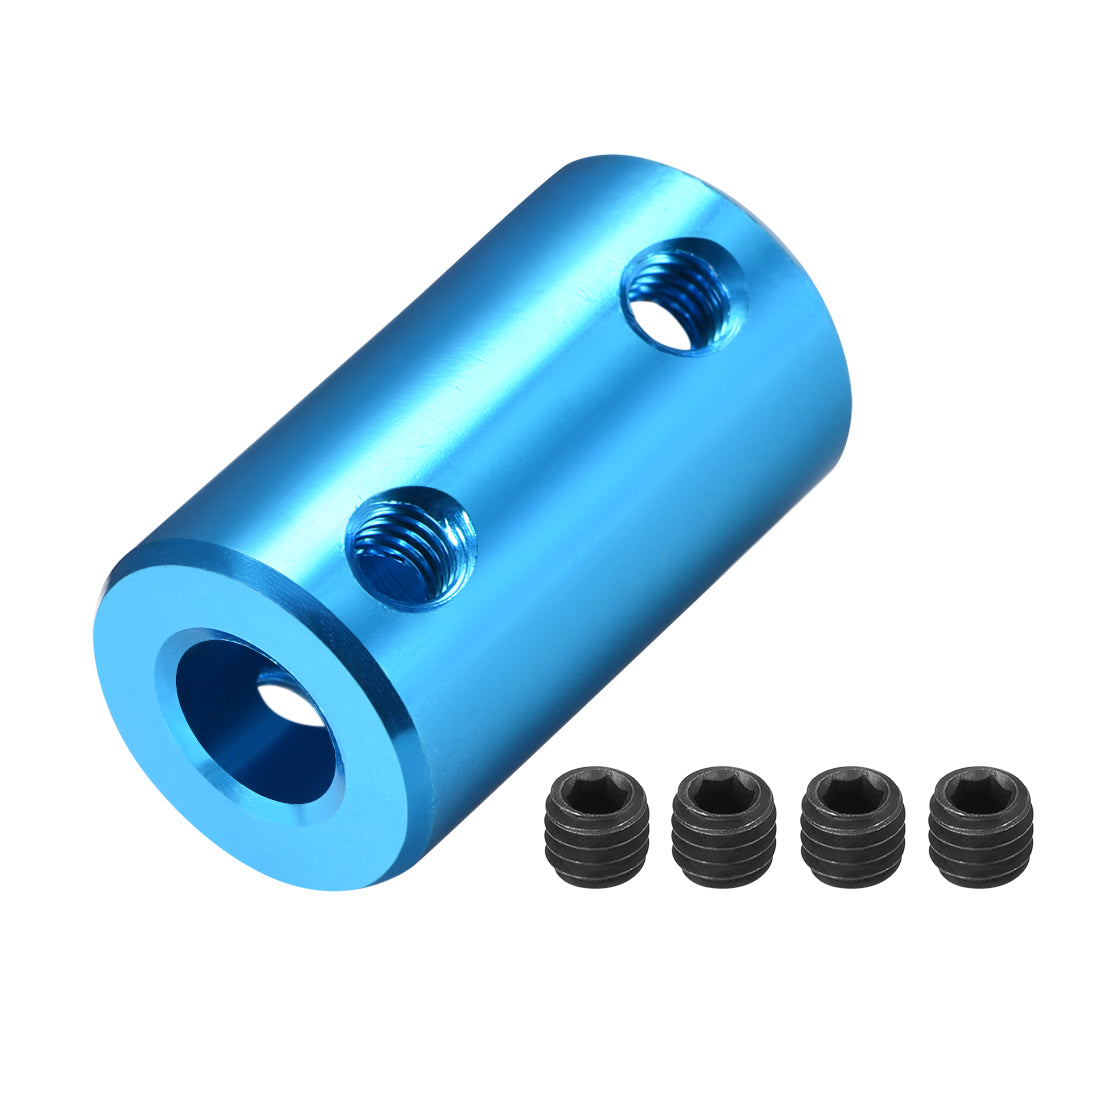 uxcell Uxcell Shaft Coupling 6.35mm to 6.35mm Bore L25xD14 Robot Motor Wheel Rigid Coupler Connector Blue 2 Pcs